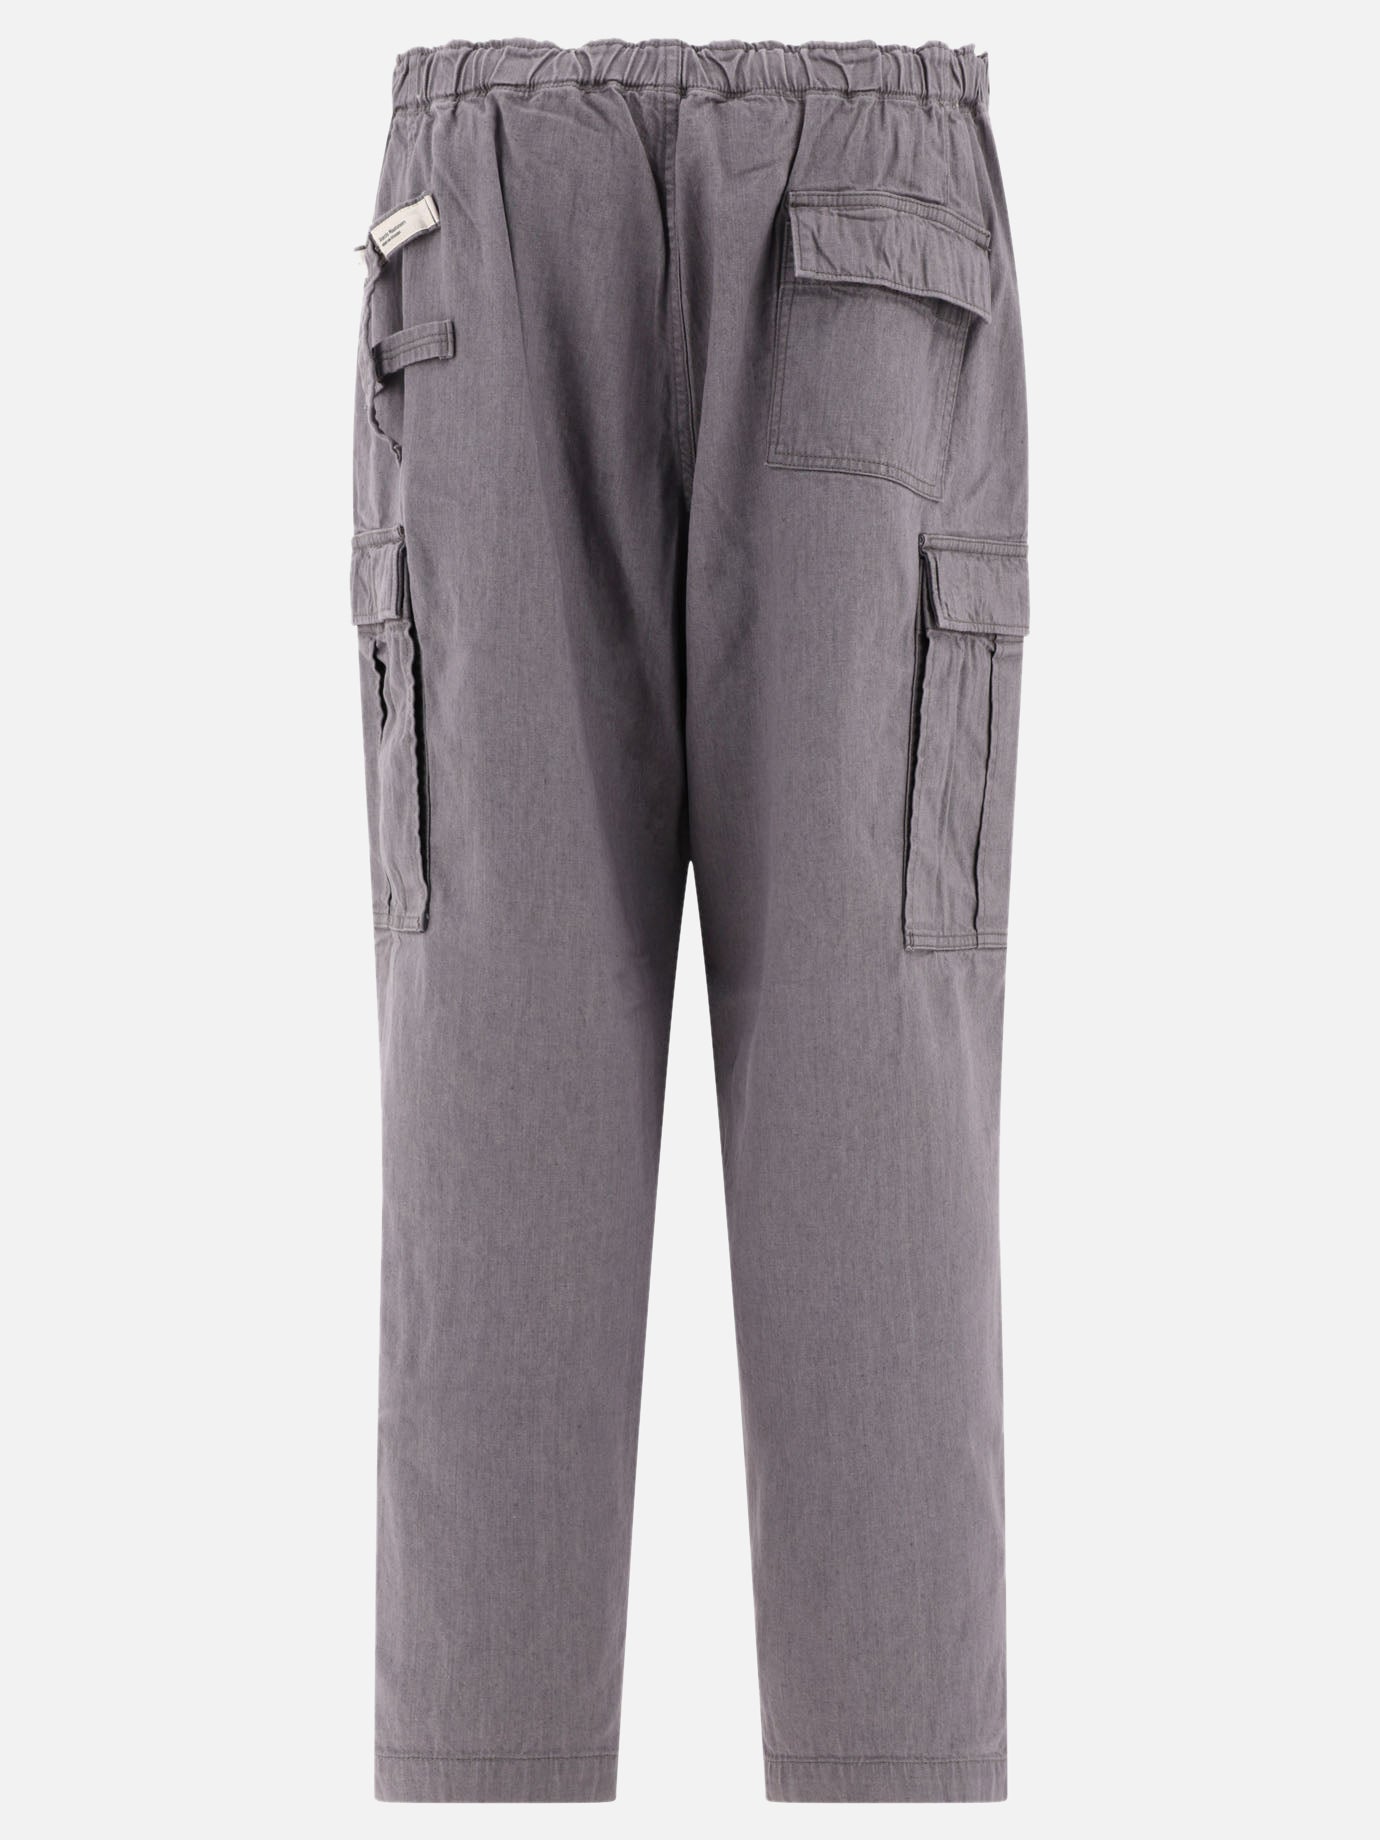 "Cargo" trousers